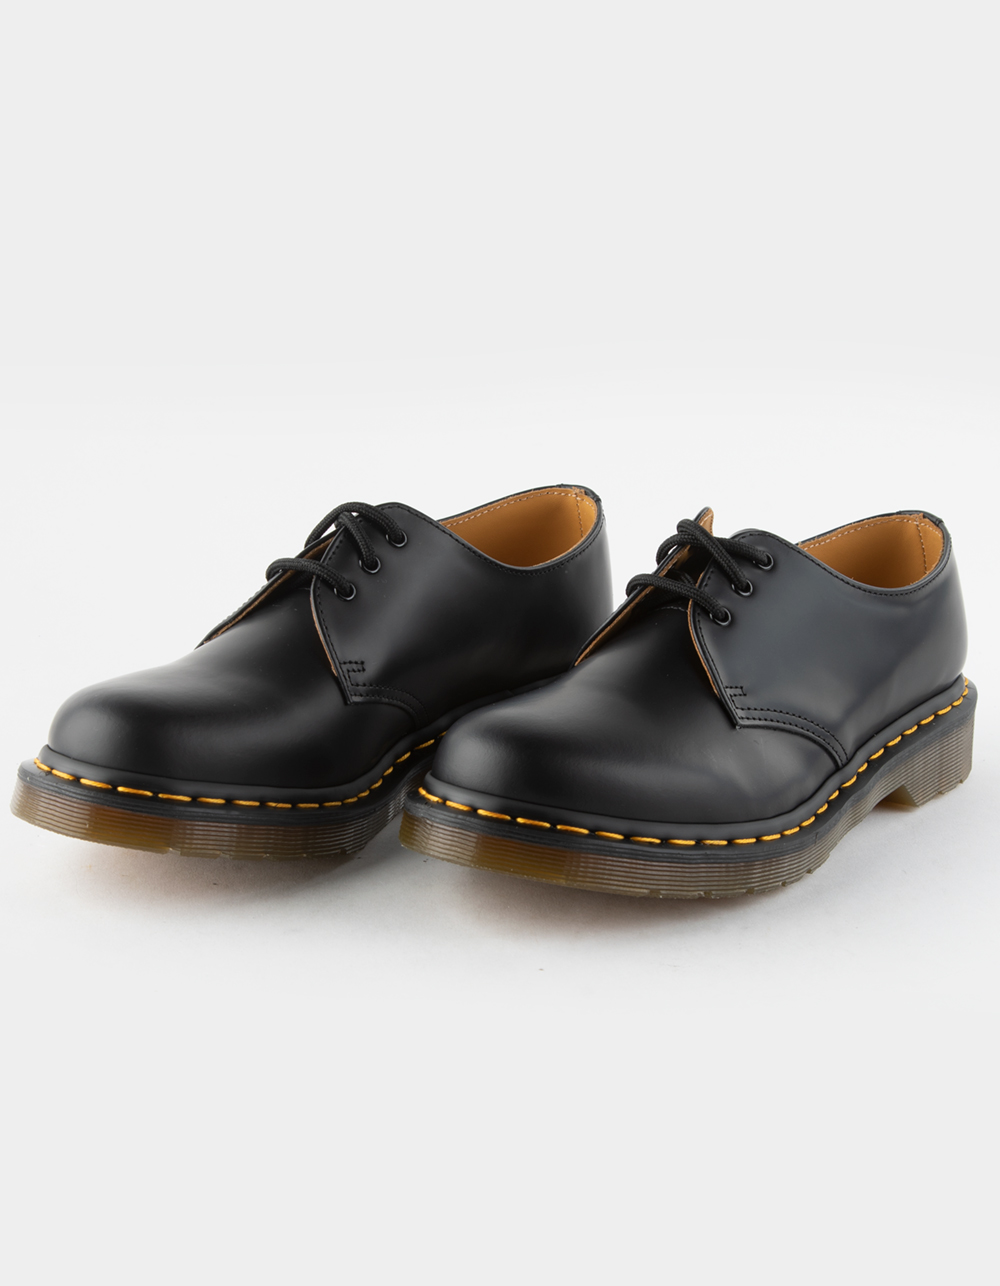 DR. MARTENS 1461 Womens Smooth Leather Oxford Shoes